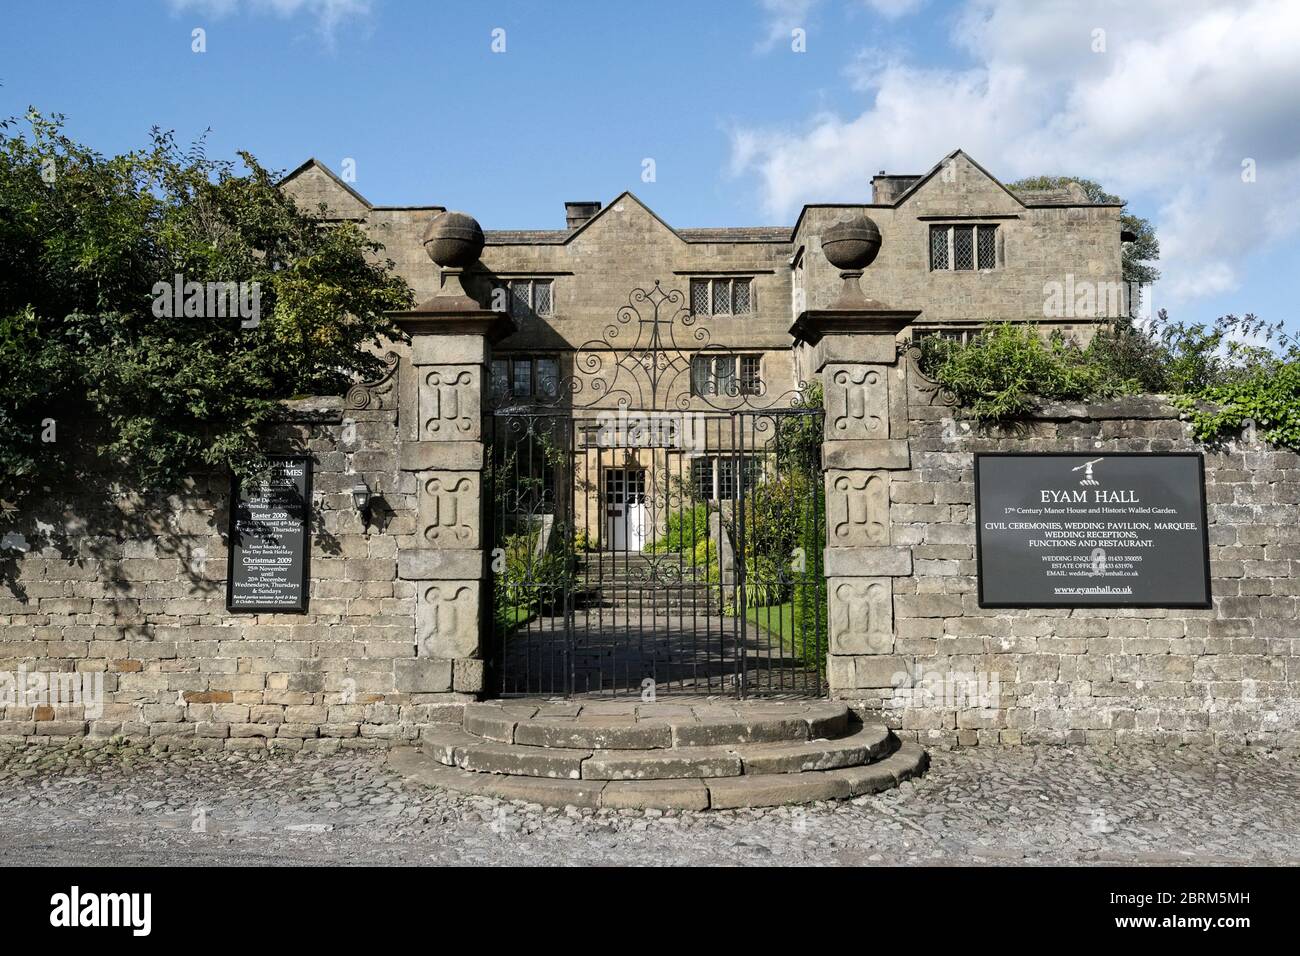 Eyam Hall in the Peak District, National Park Derbyshire England UK, Jacobian styled historic manor house, grade II listed building. Stock Photo